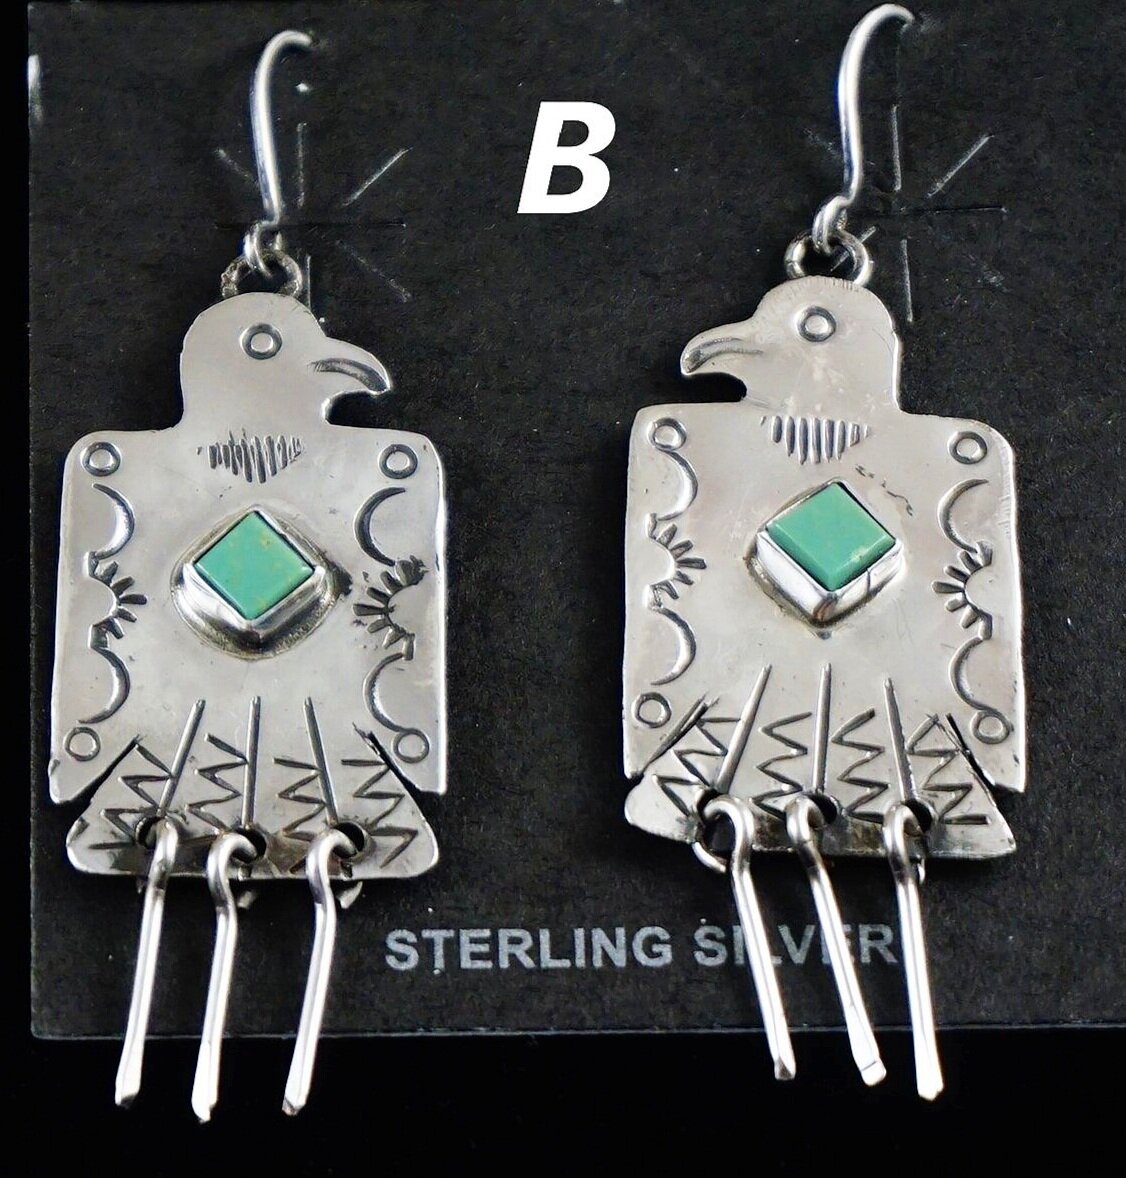 Navajo Hand Stamped Sterling Silver Turquoise Southwest Dangle Earrings